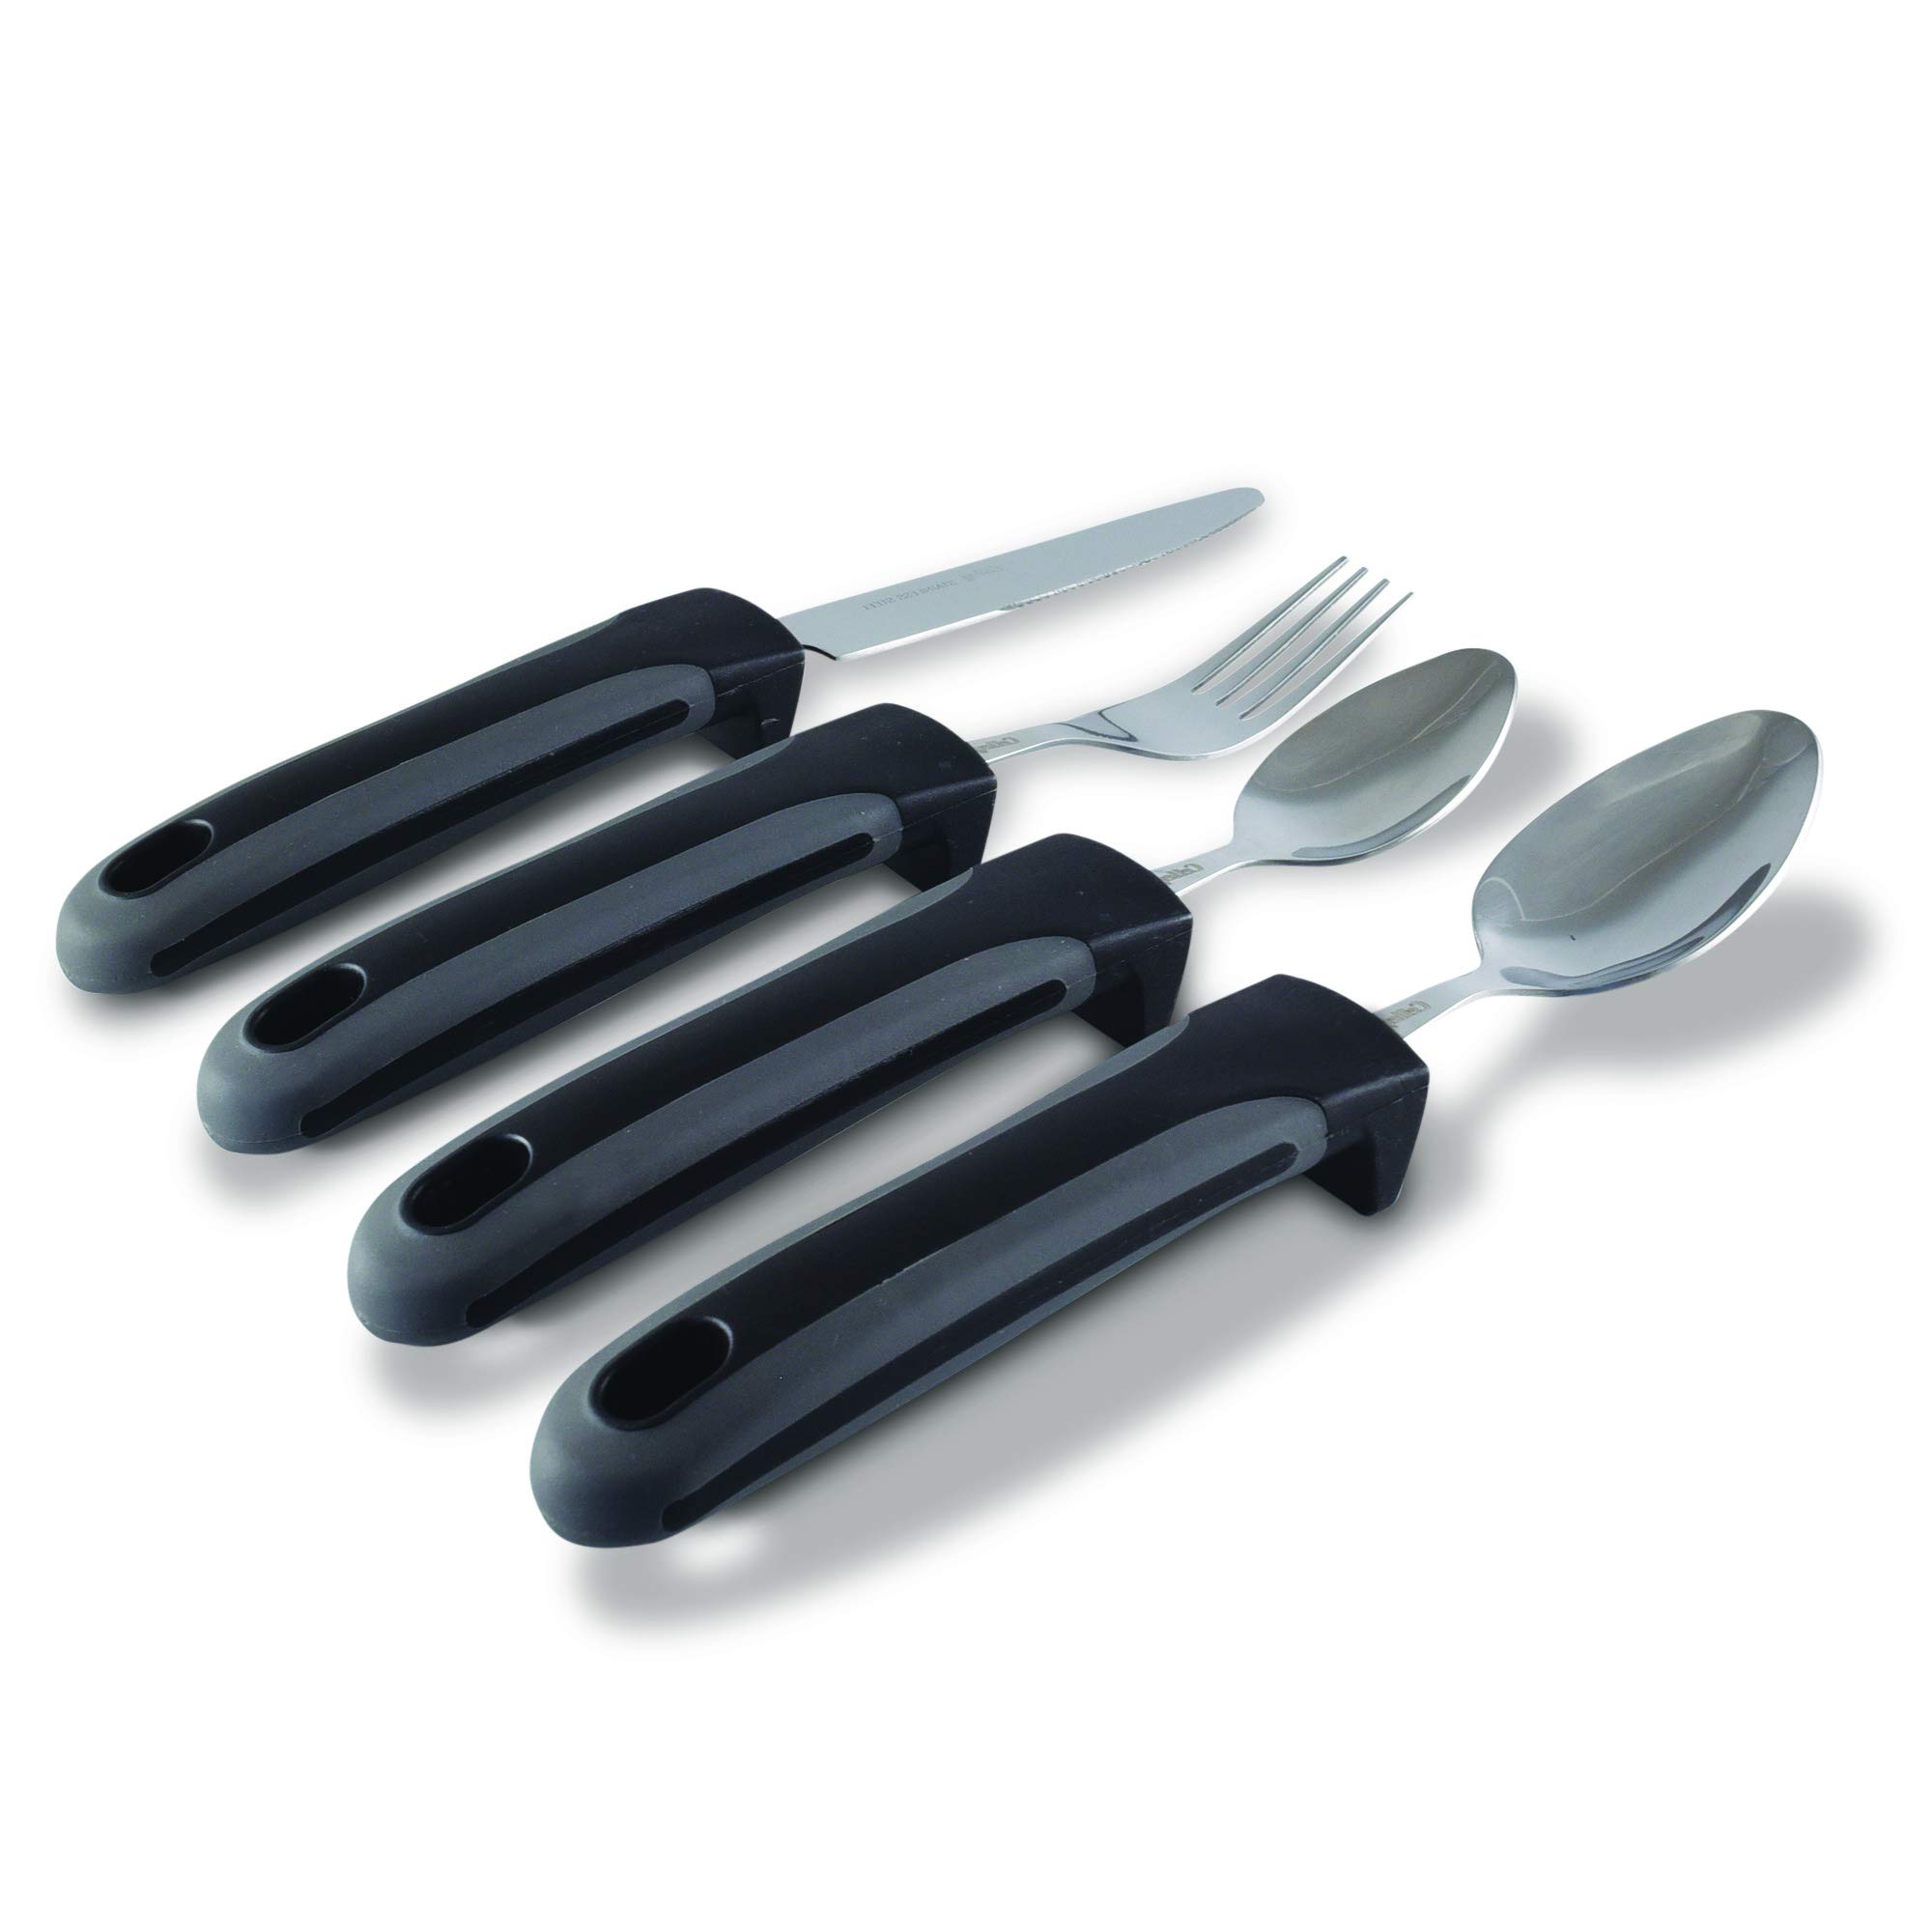 Adaptive Fork, Spoon, & Steak Knife Set - Dining With Dignity